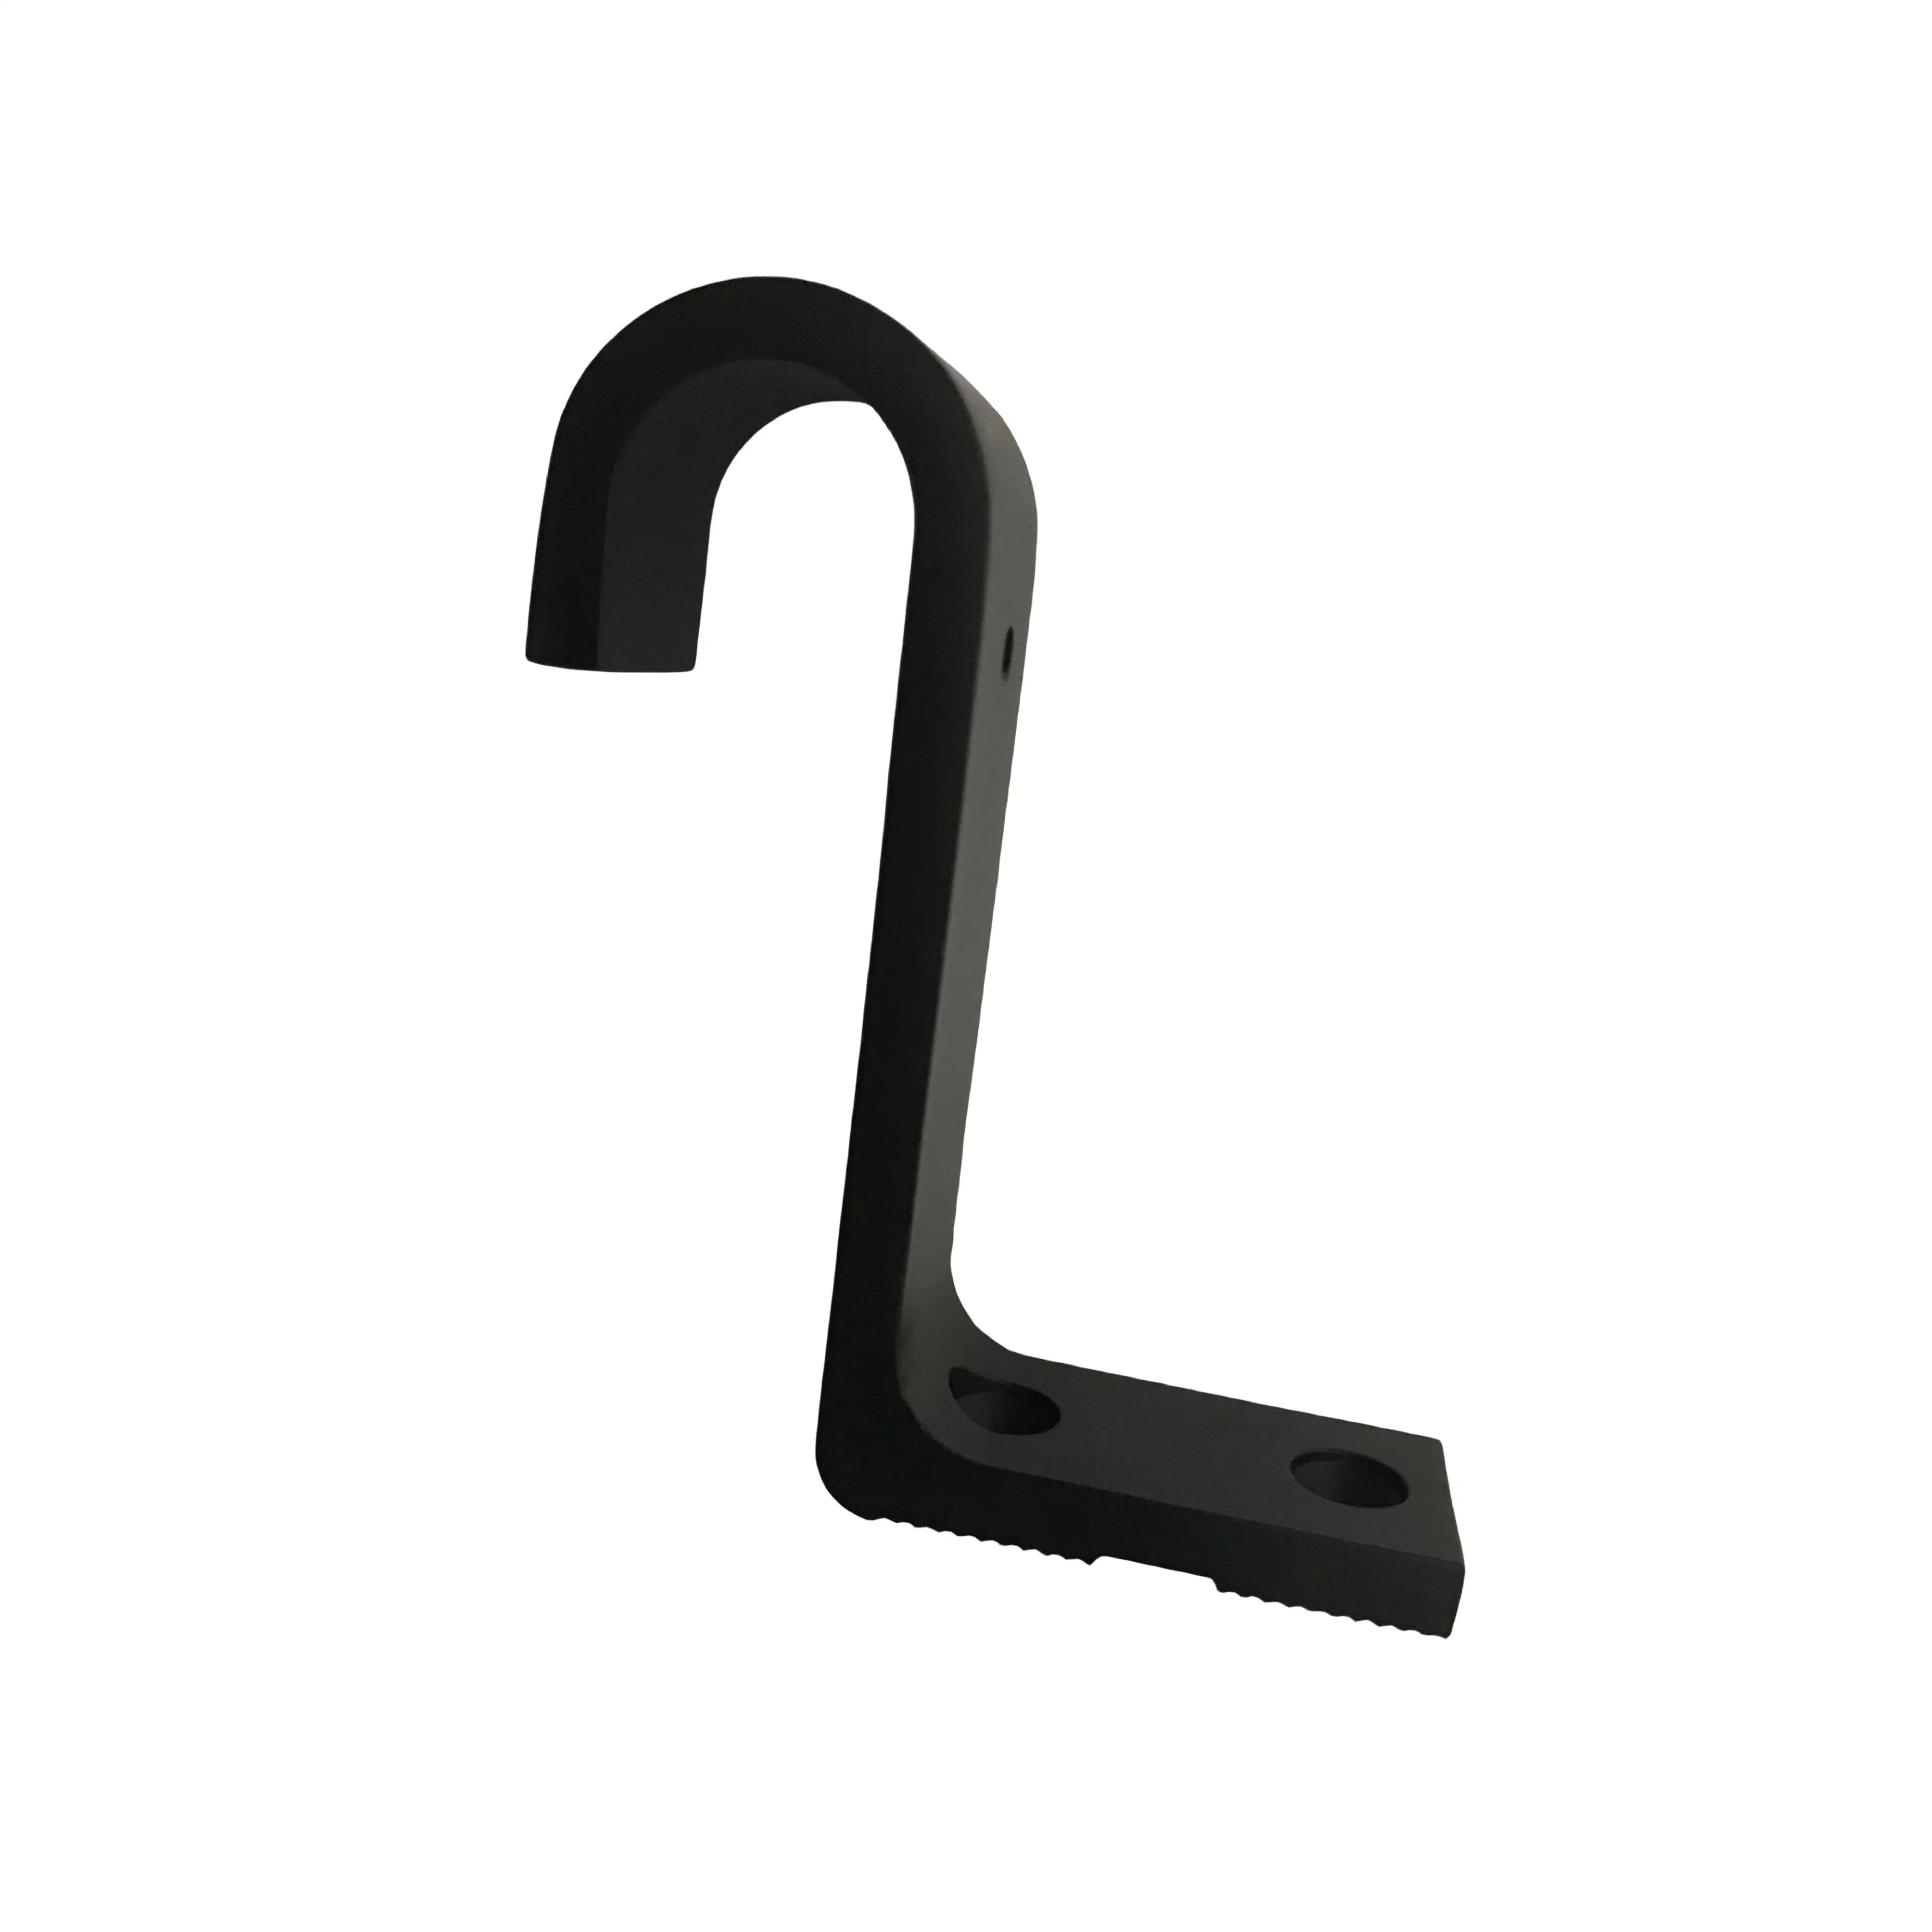 Manufacturers Sales Popular Products Curtain Finials Accessories for Hardware and Construction